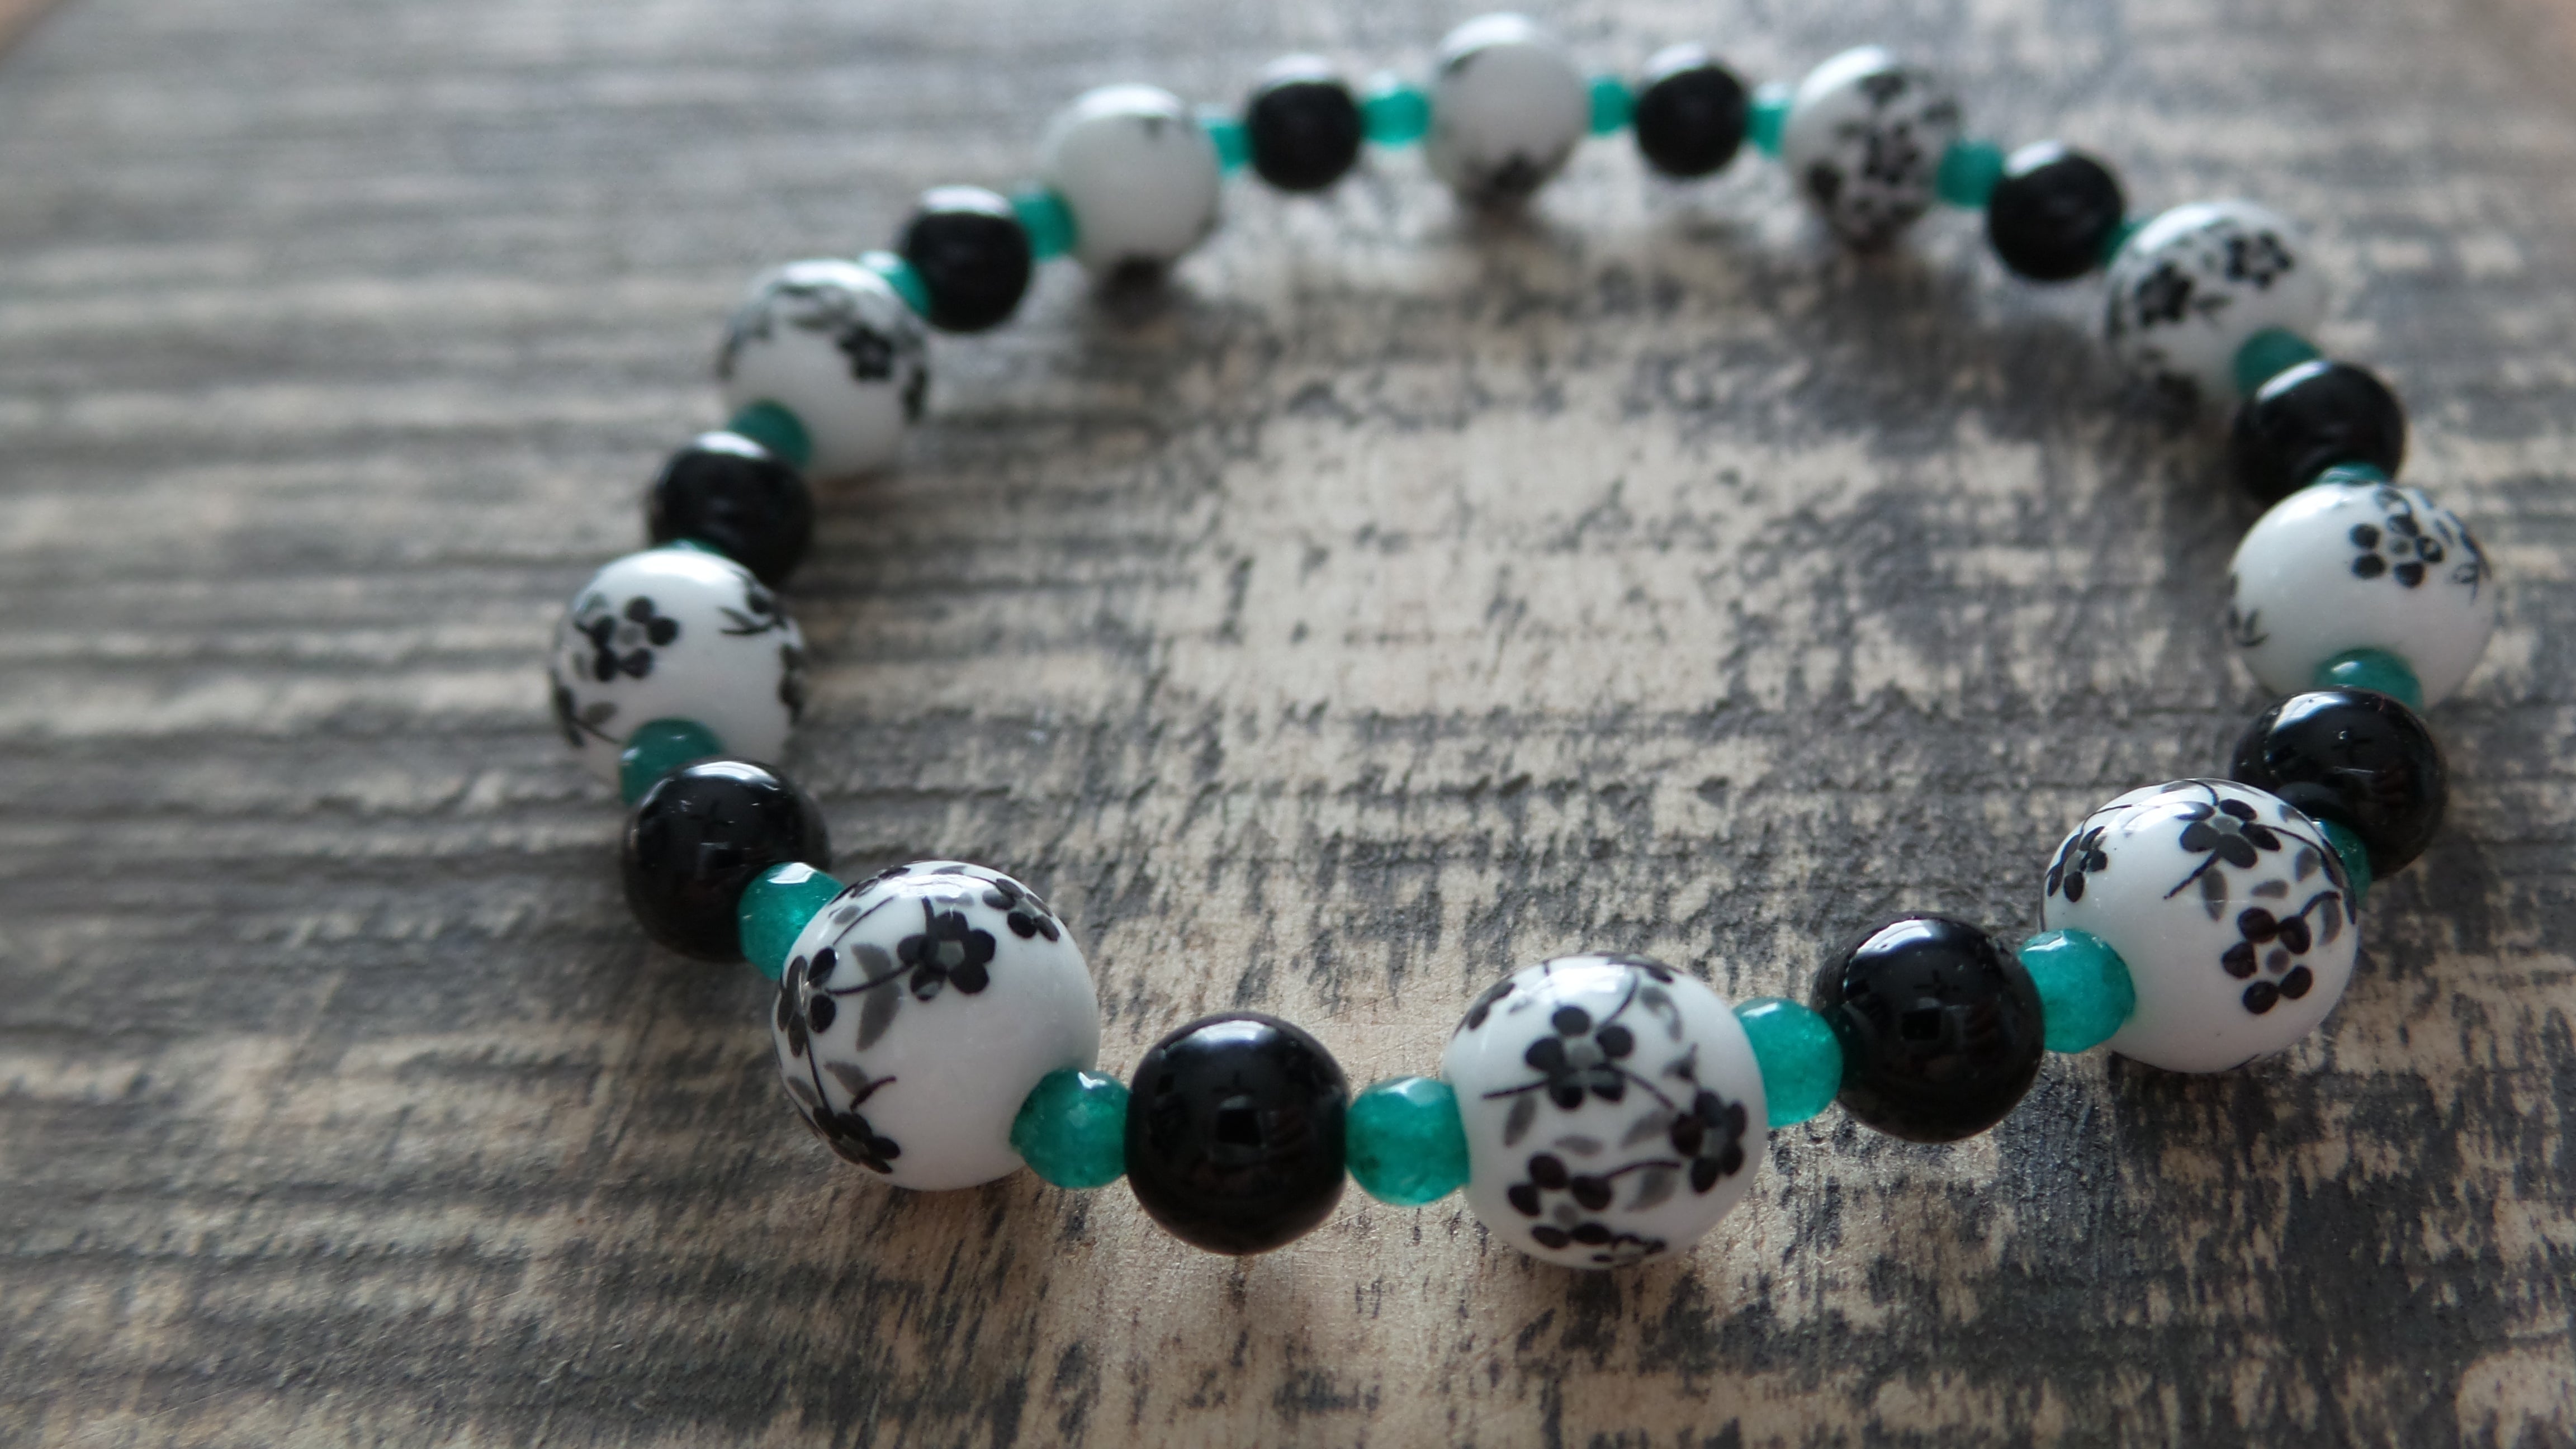 Bracelet- Black and White Floral Glass with Black and Teal Accents